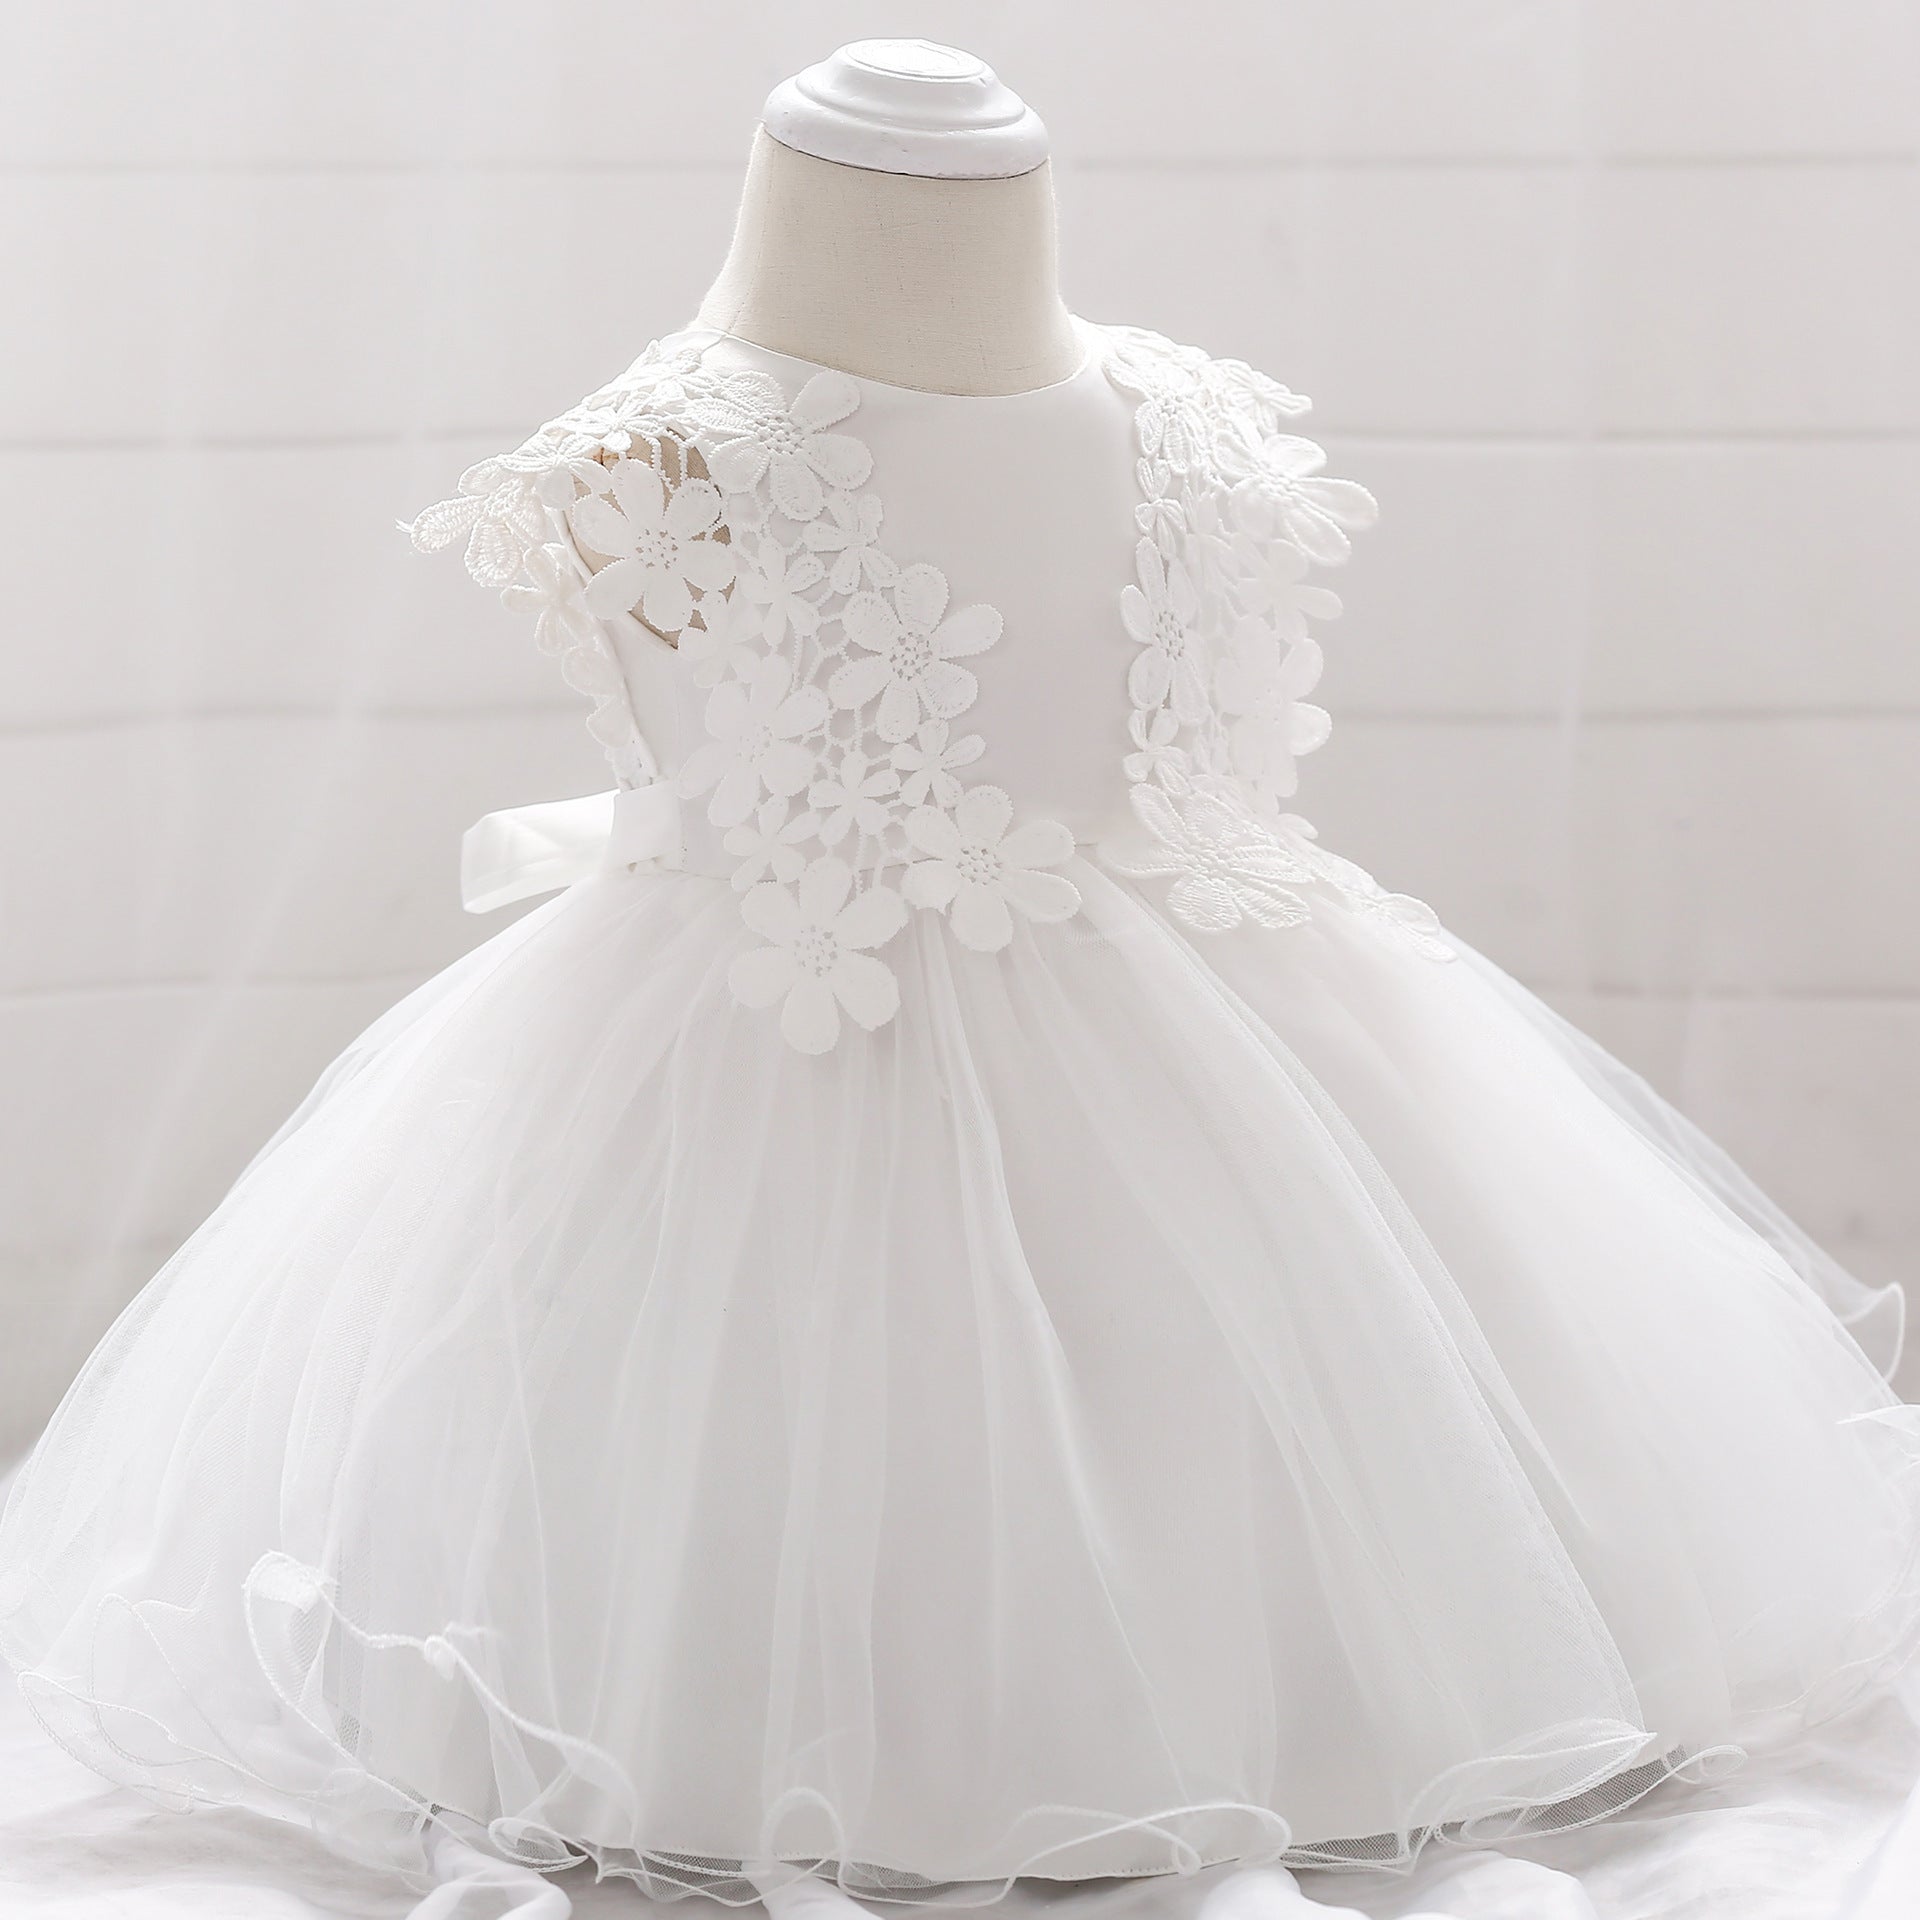 Baby's First Birthday Wedding Dress Lovely Lace Hook Flower Princess Dress Baby Cotton Breathable Dress